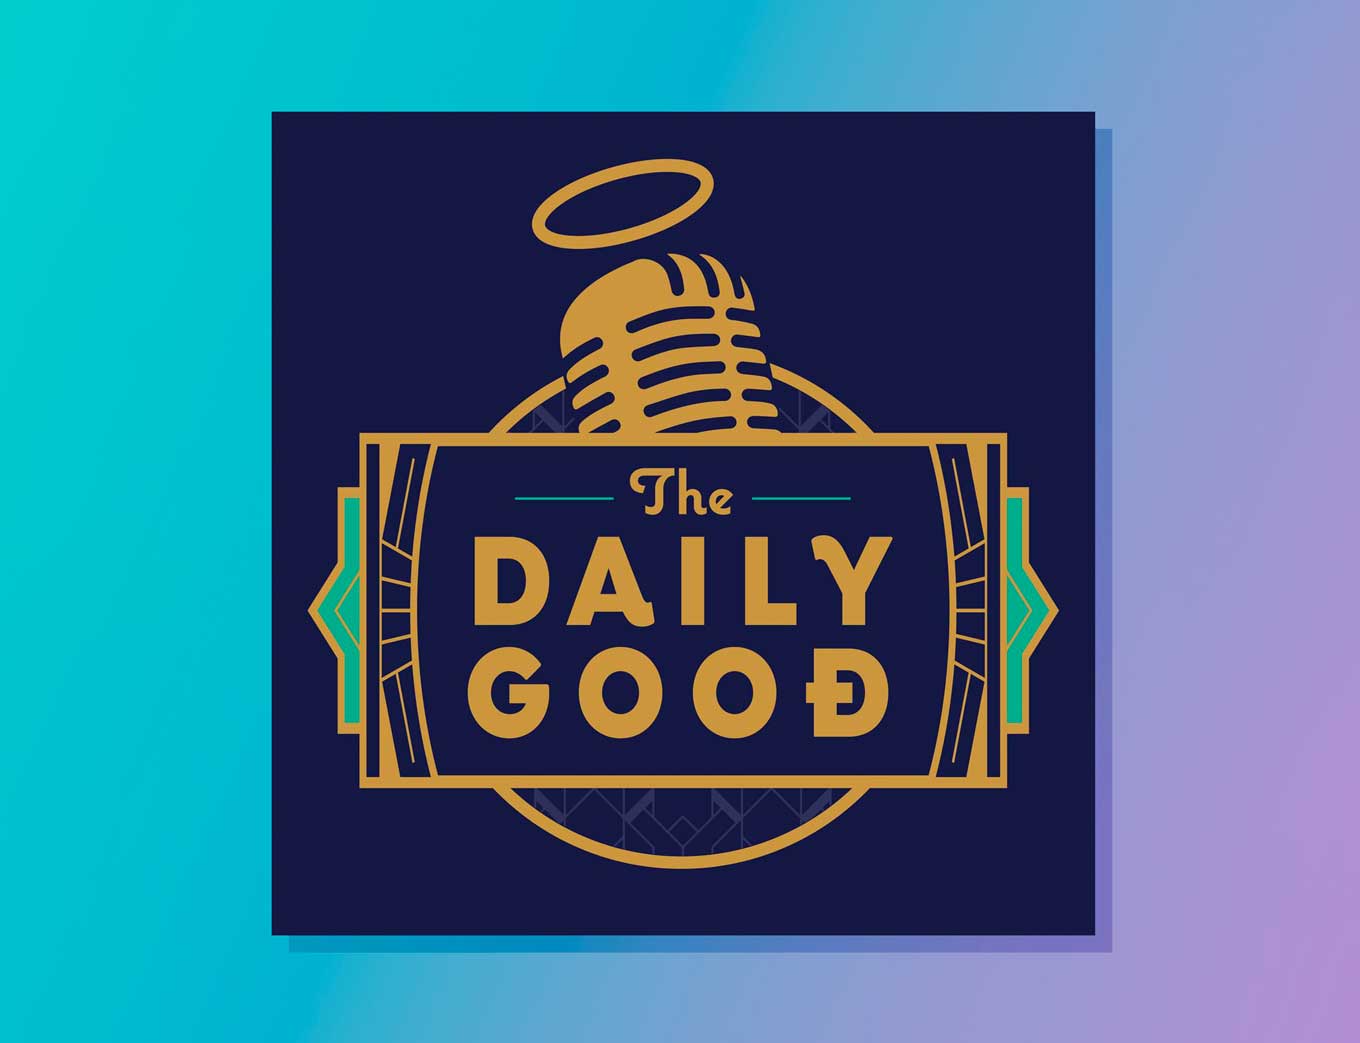 Podcast Artwork: The Daily Good